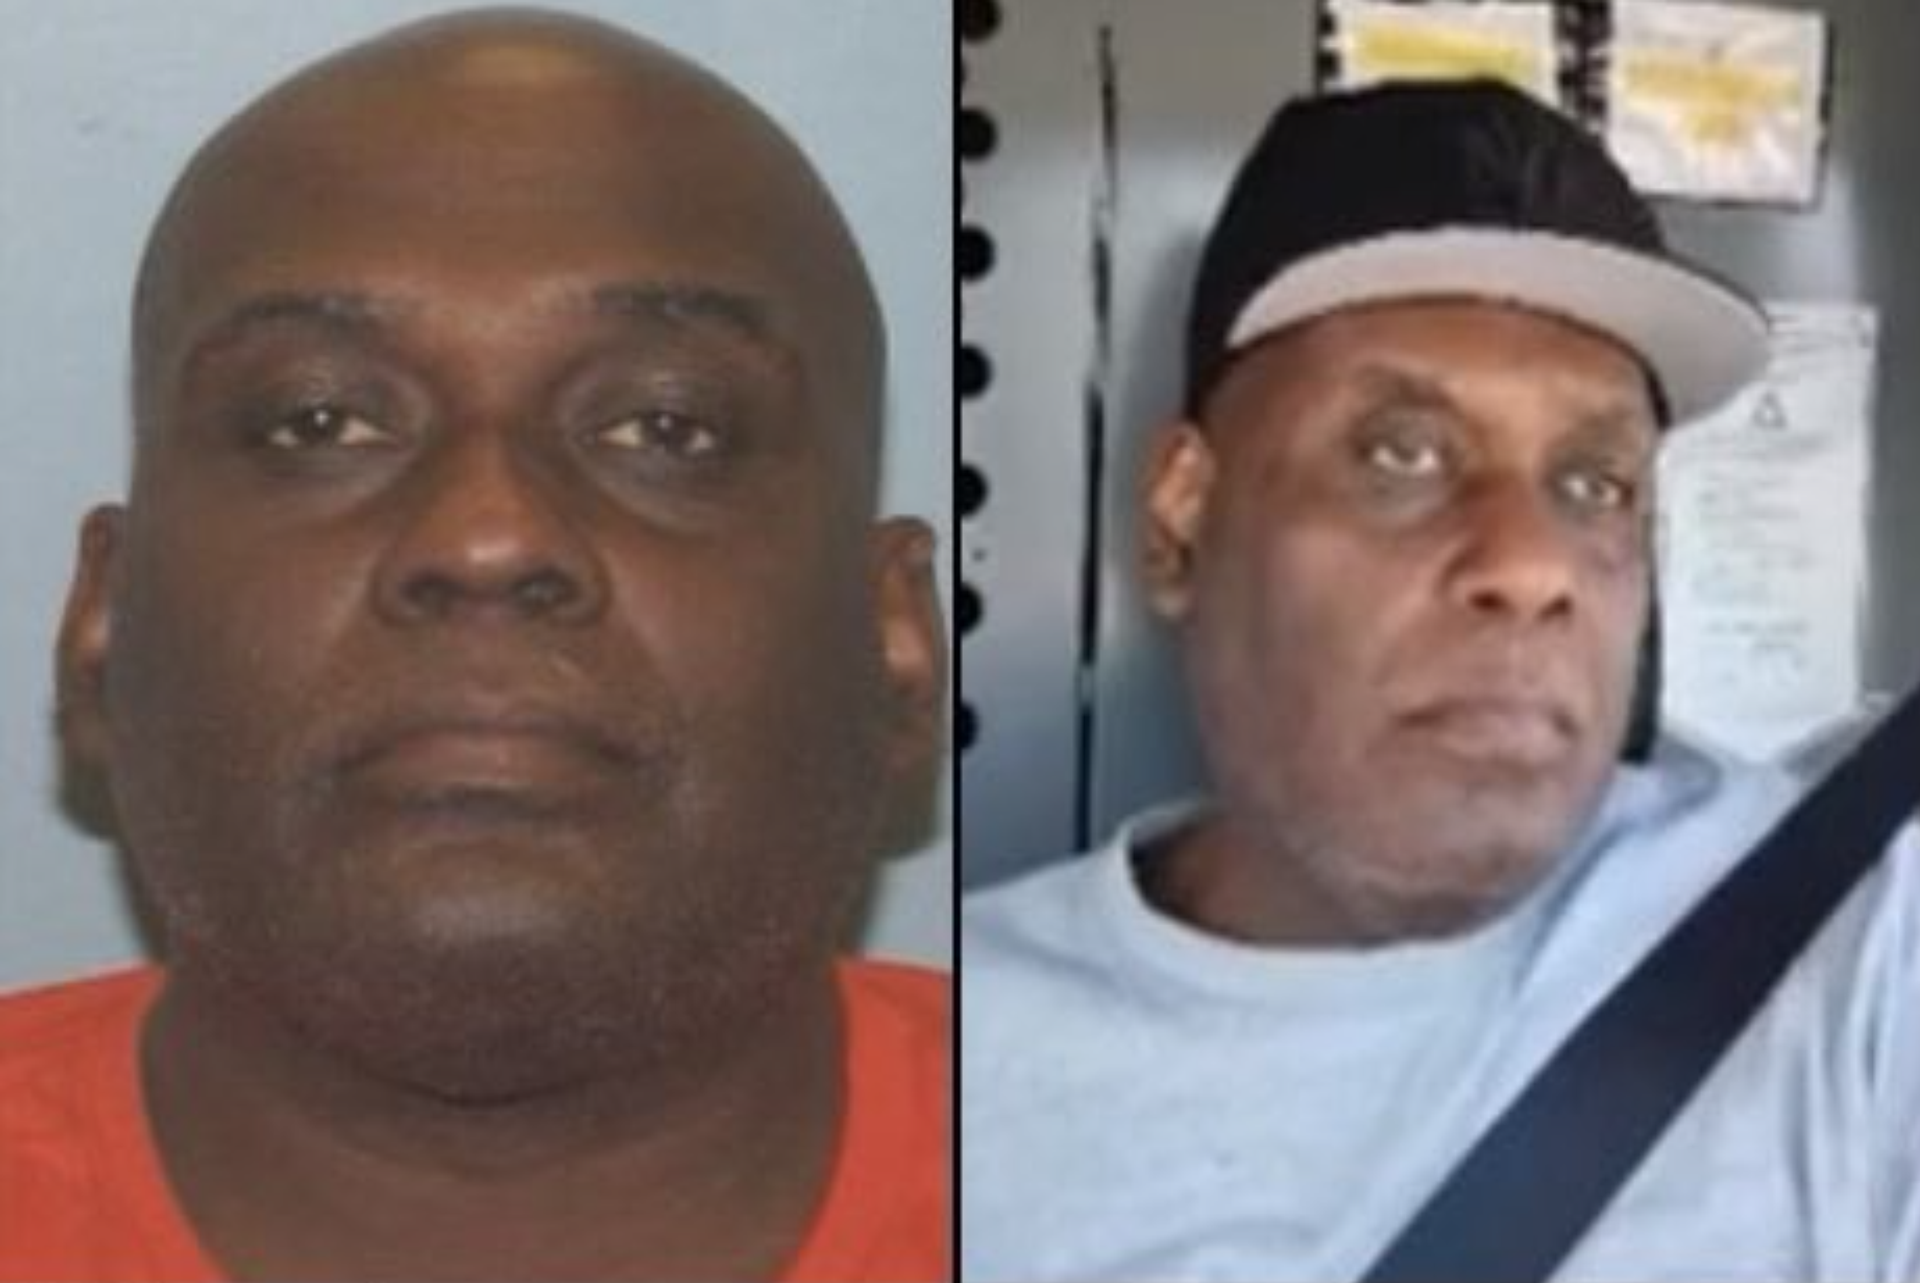 This is Frank James who is a person of interest in this investigation. Any information can be directed to @NYPDTips at 800-577-TIPS, tweeted the New York City Police Department (NYPD) on Tuesday, April 12, 2022. - Sputnik International, 1920, 13.04.2022